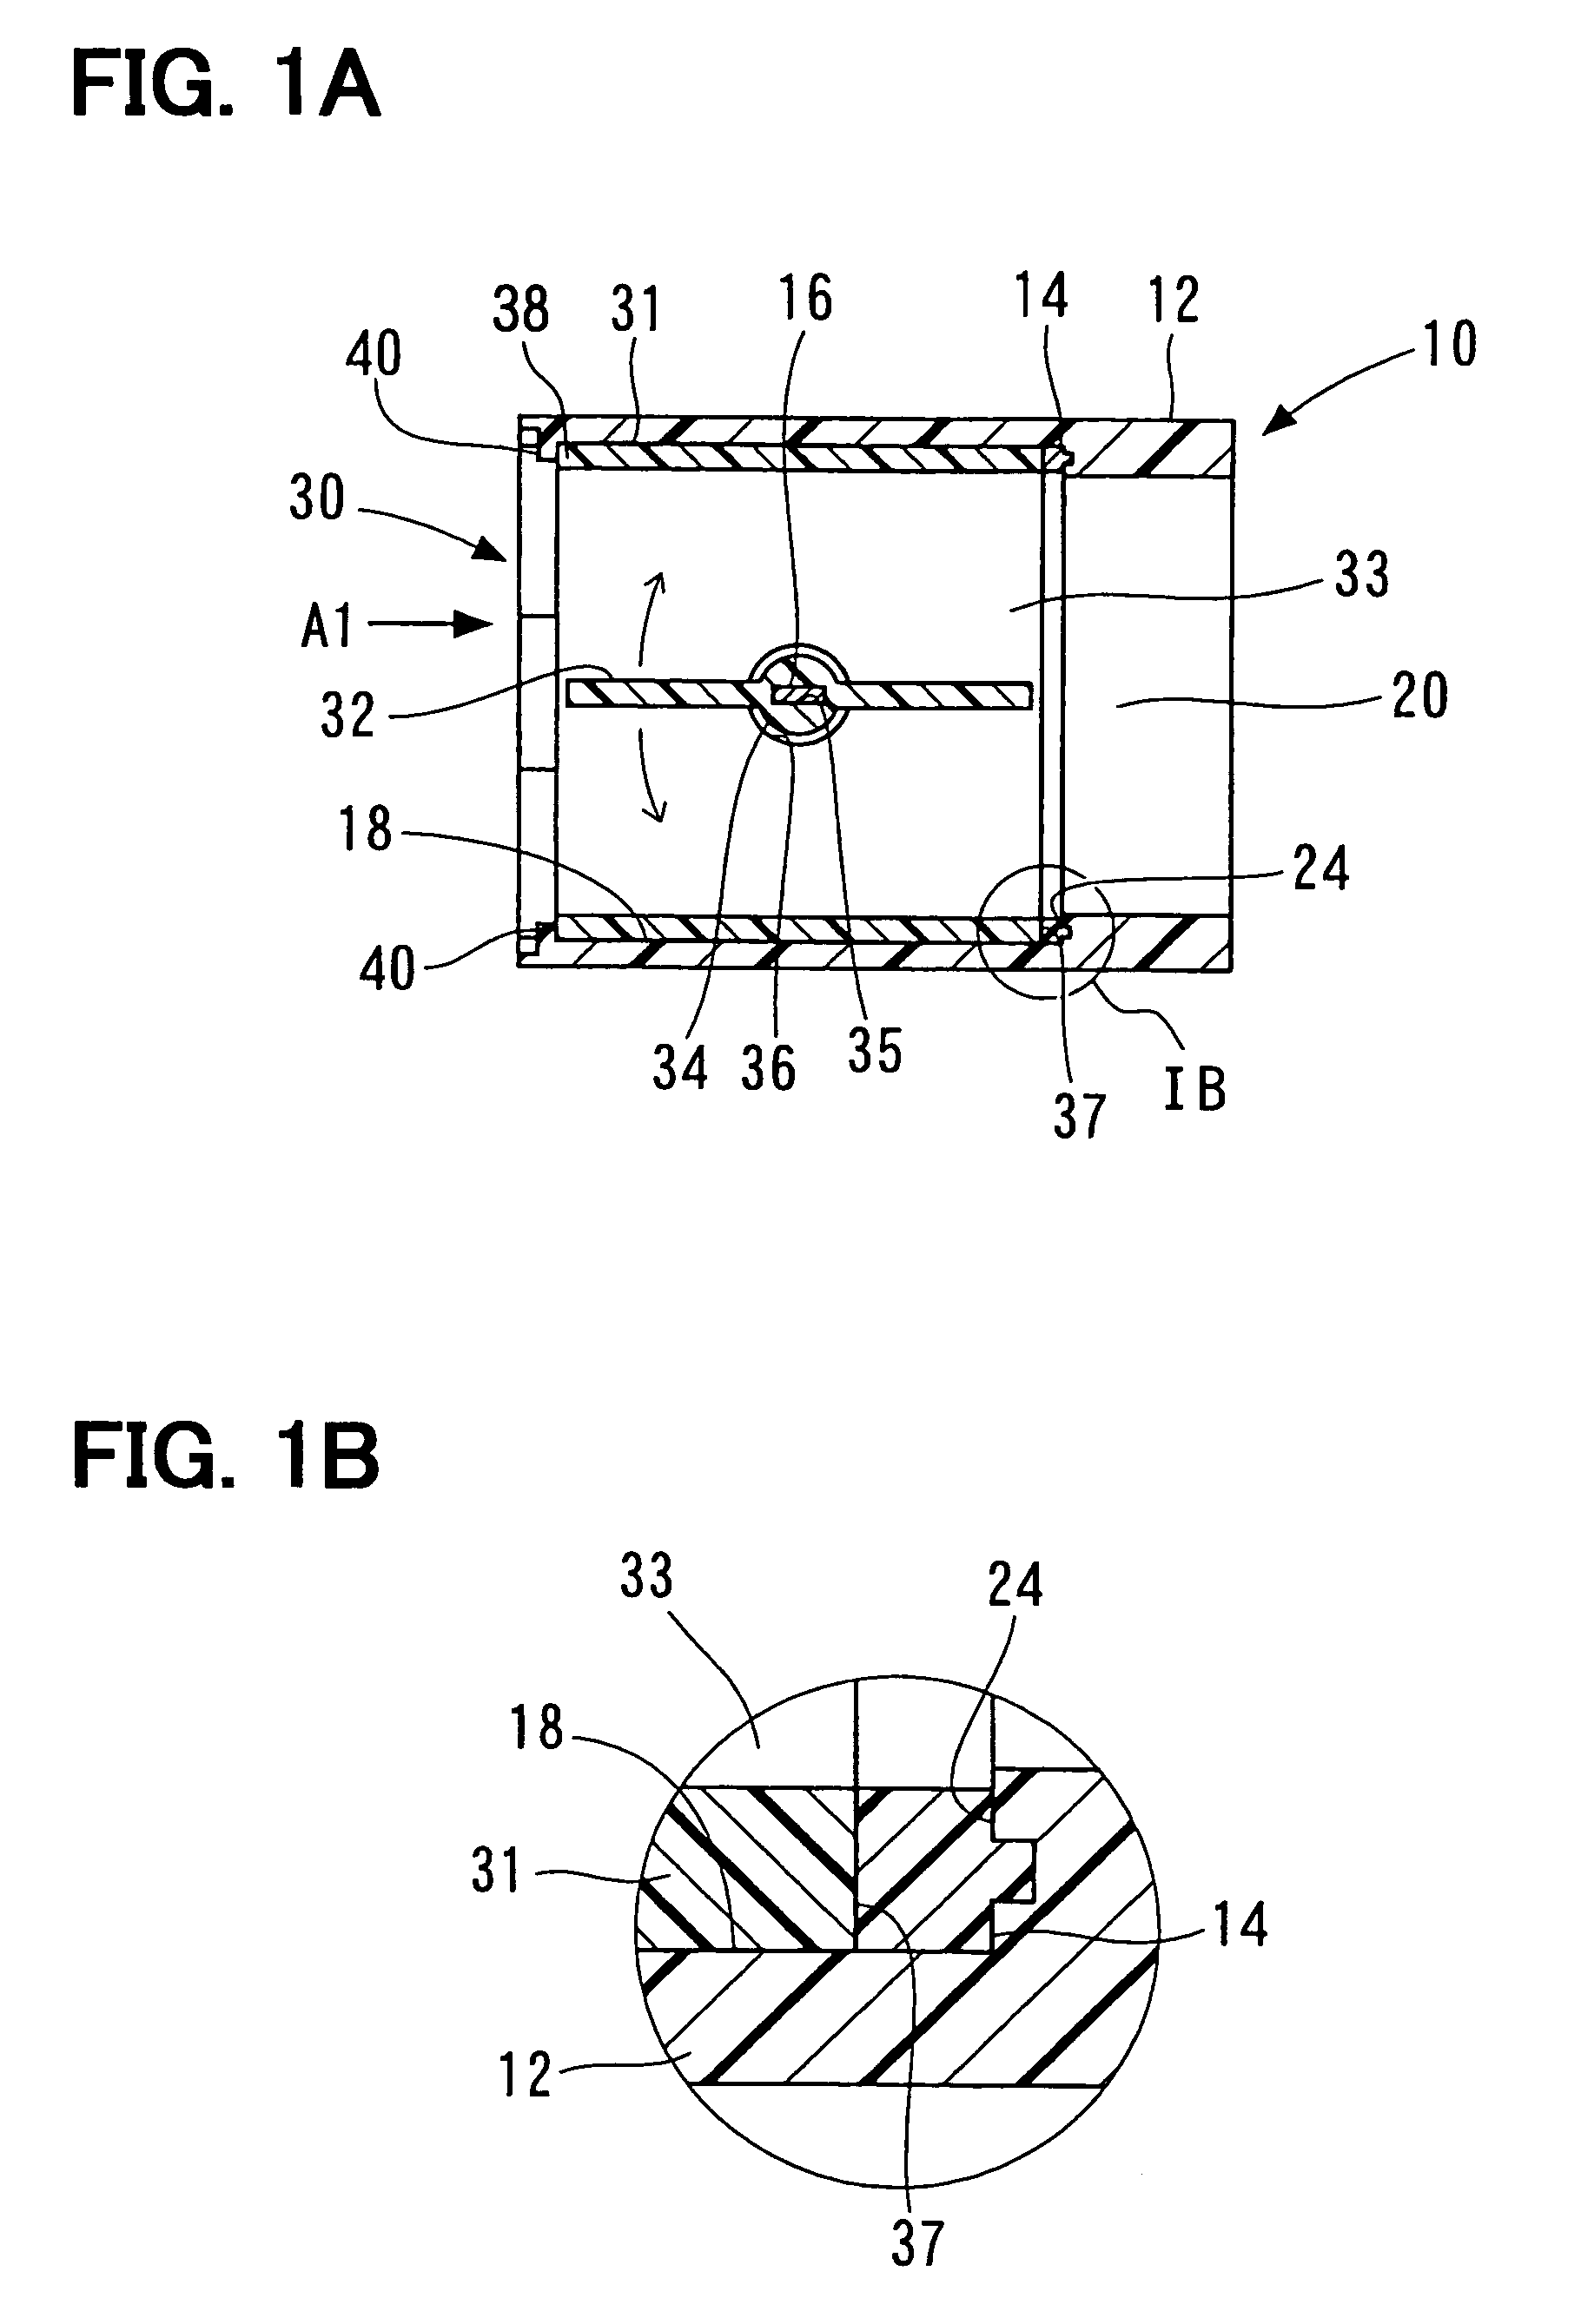 Intake device and mounting structure of valve unit